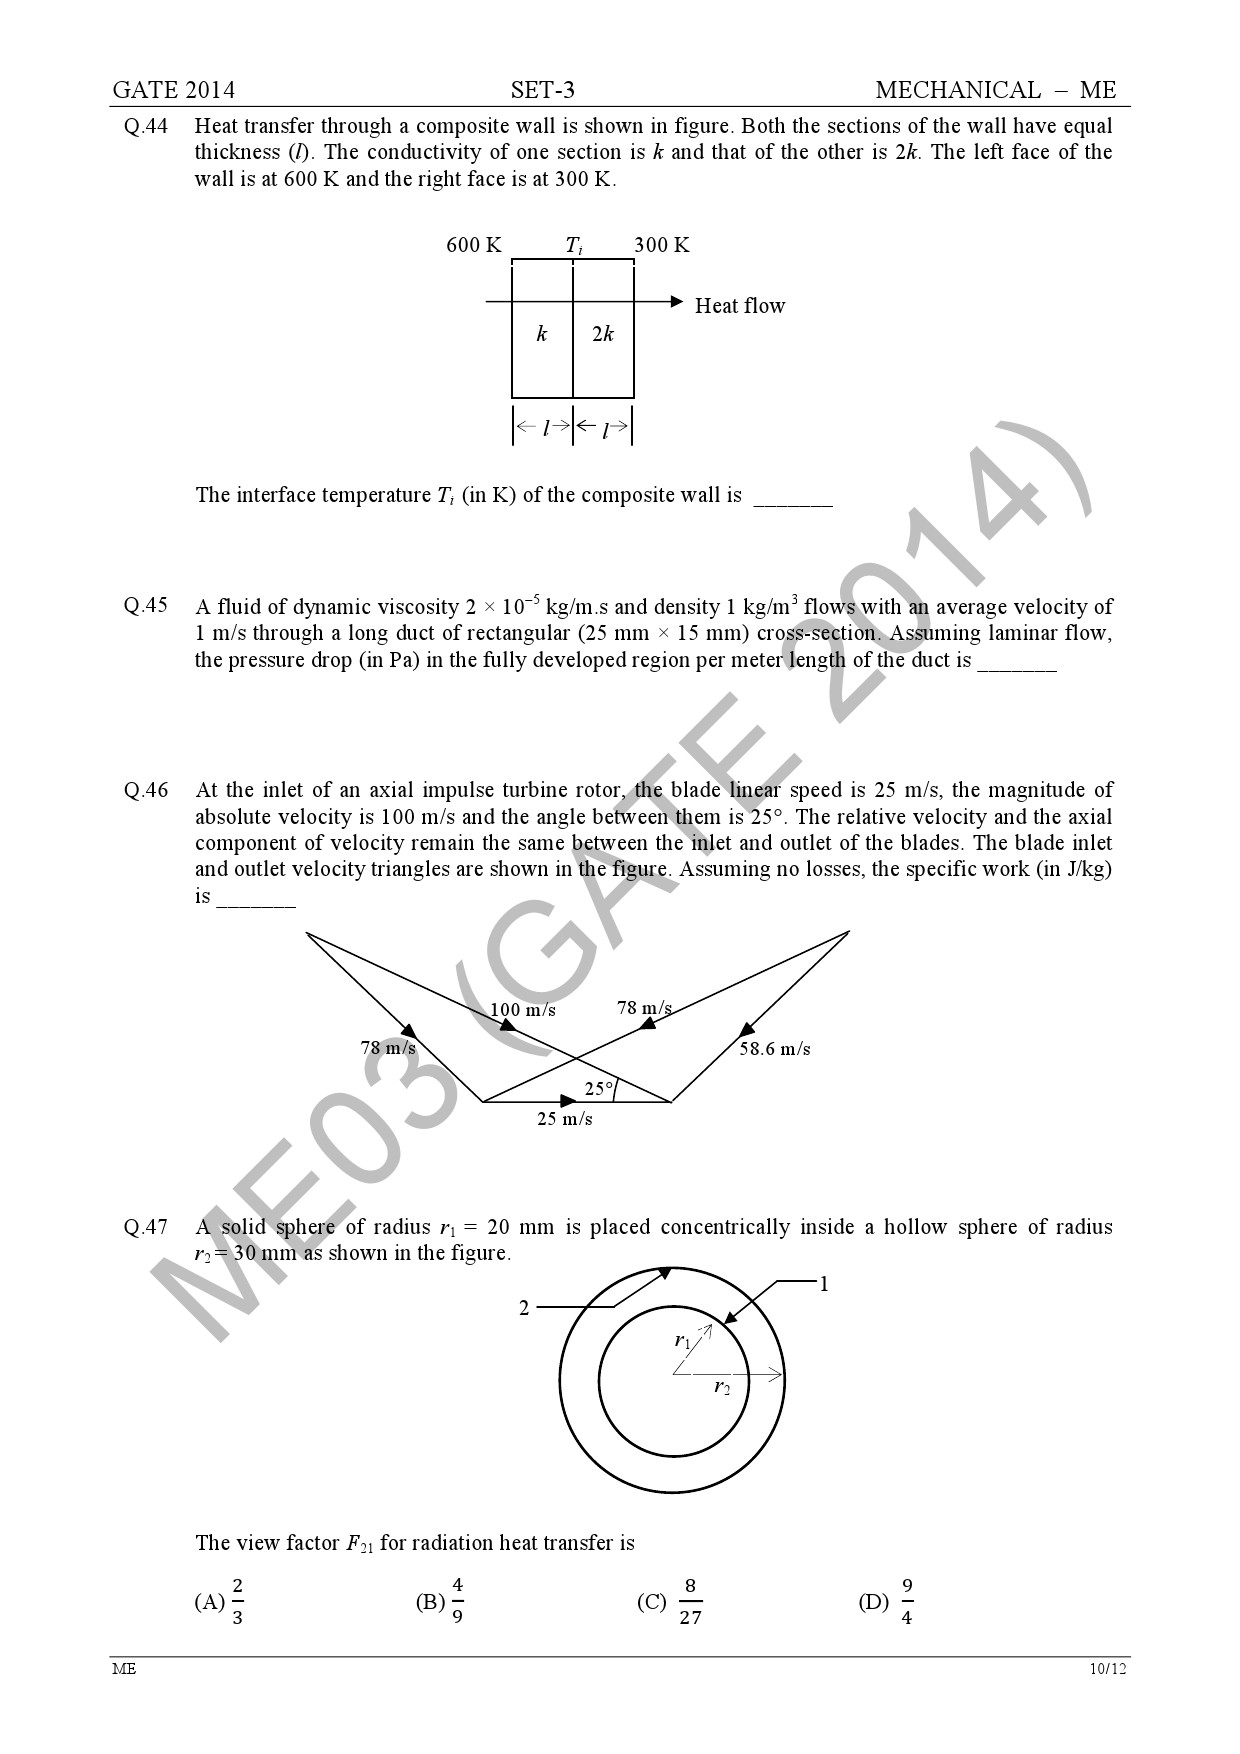 GATE Exam Question Paper 2014 Mechanical Engineering Set 3 17